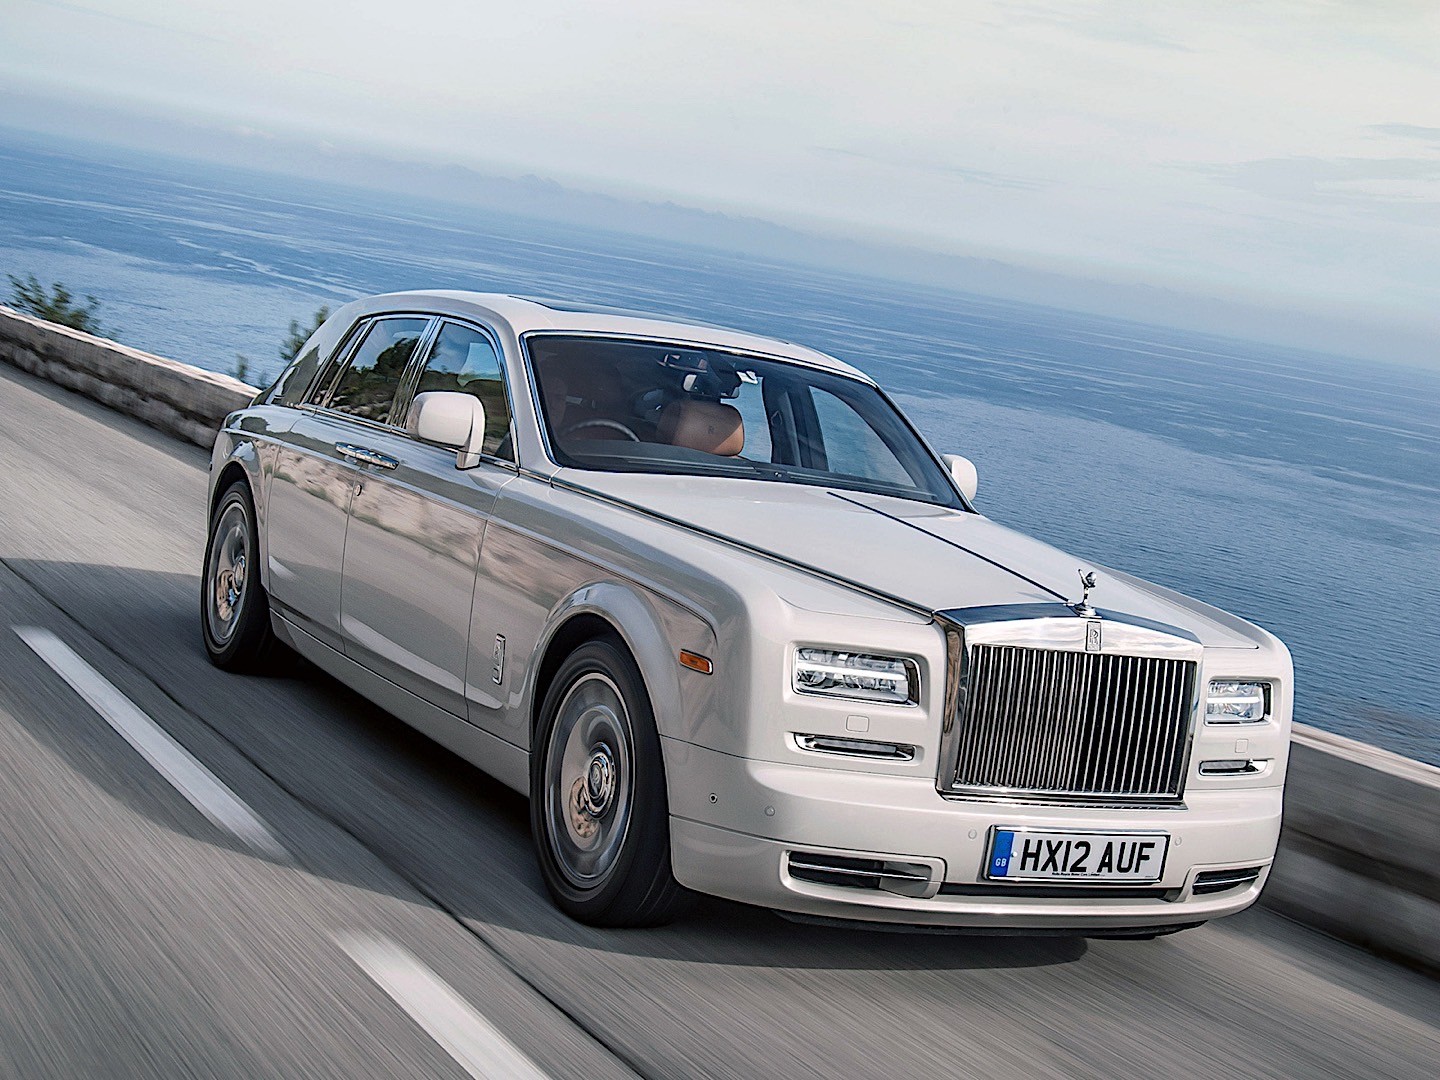 General 1440x1080 car ocean view outdoors clouds overcast vehicle luxury cars frontal view water licence plates British cars Rolls-Royce